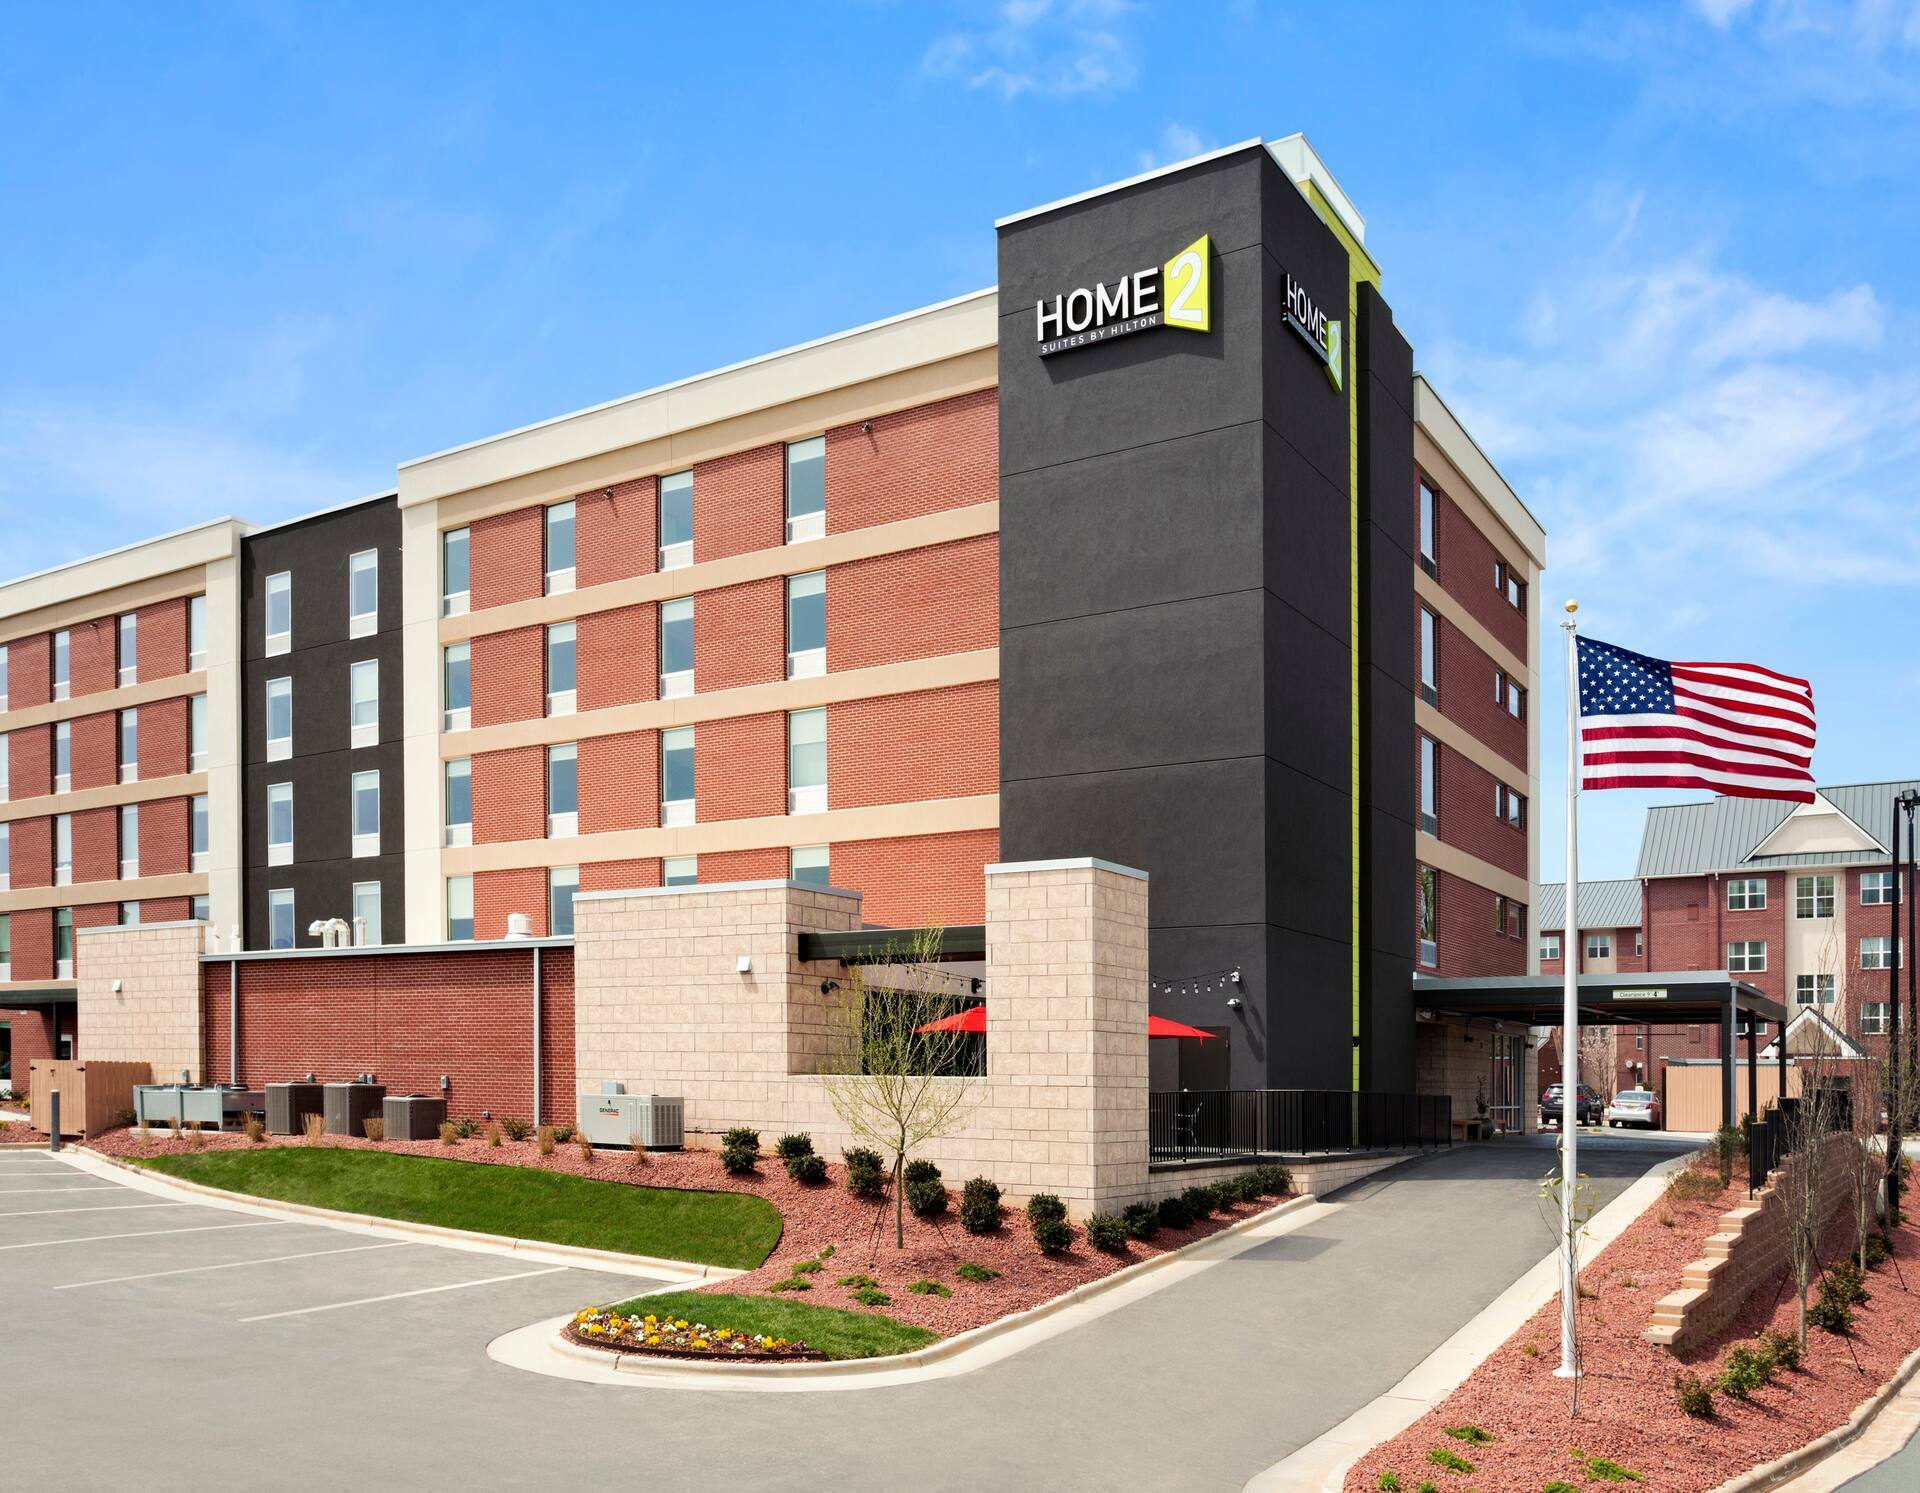 Photo of Home2 Suites by Hilton Greensboro Airport, NC, Greensboro, NC